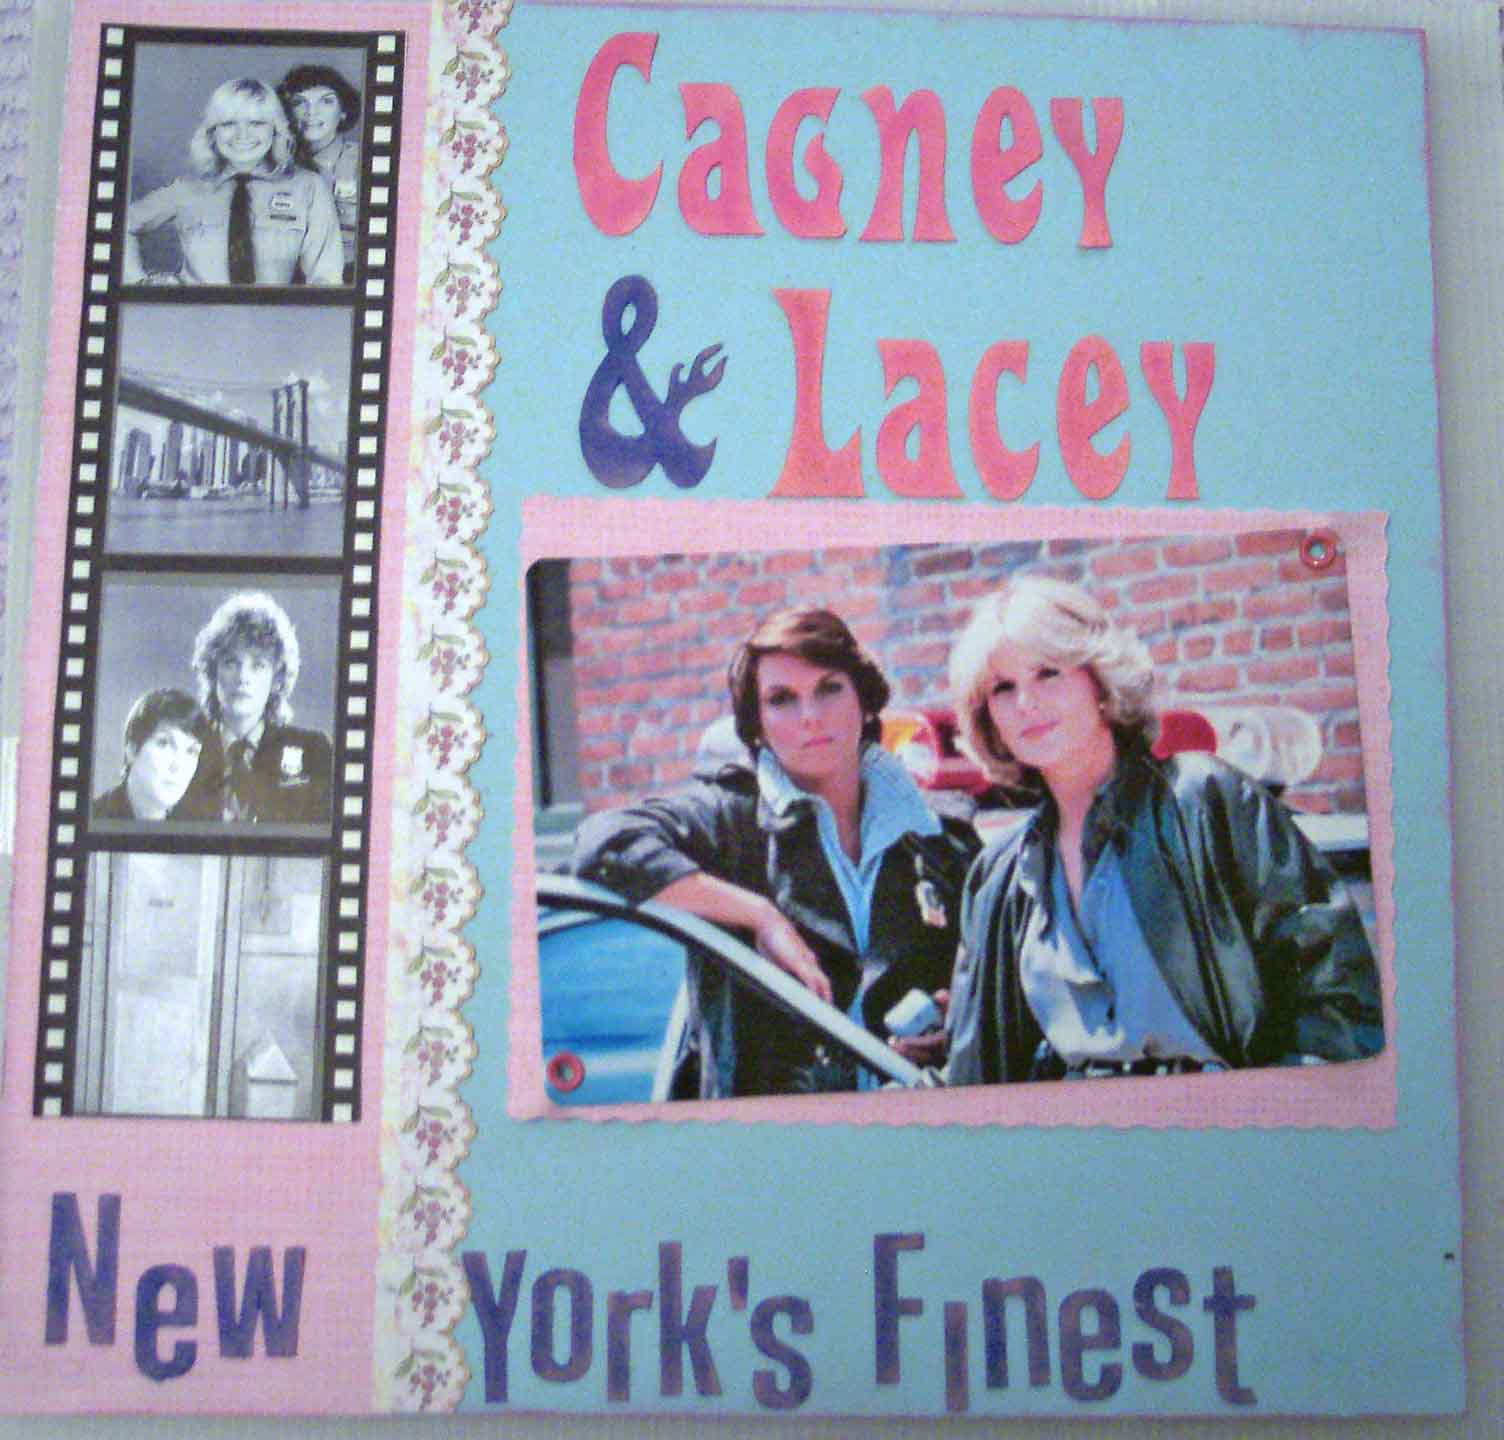 [cagney+and+lacey.jpg]